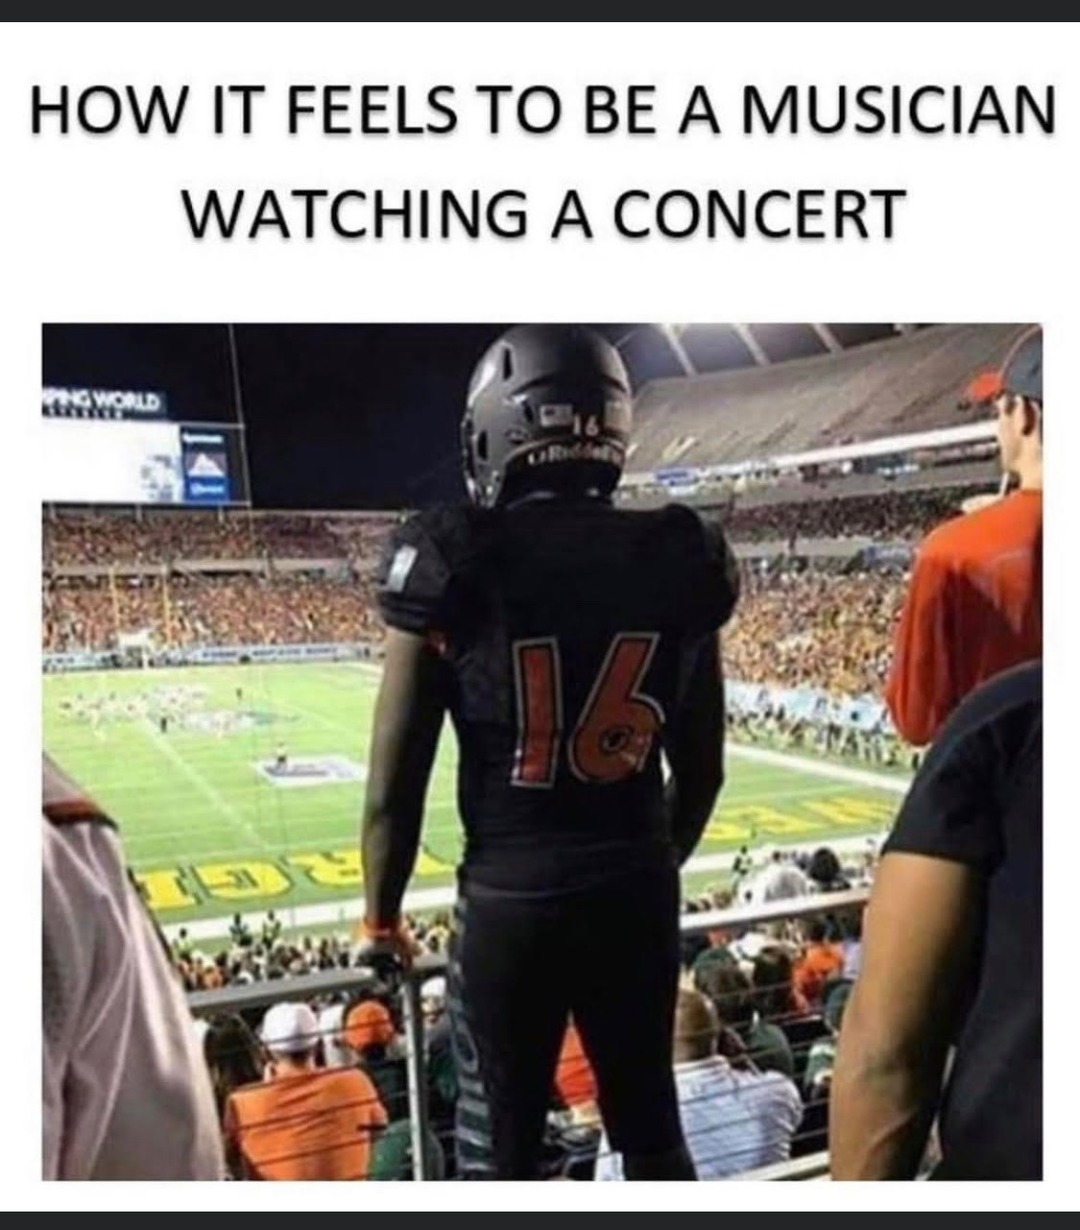 As a drummer I can confirm - meme